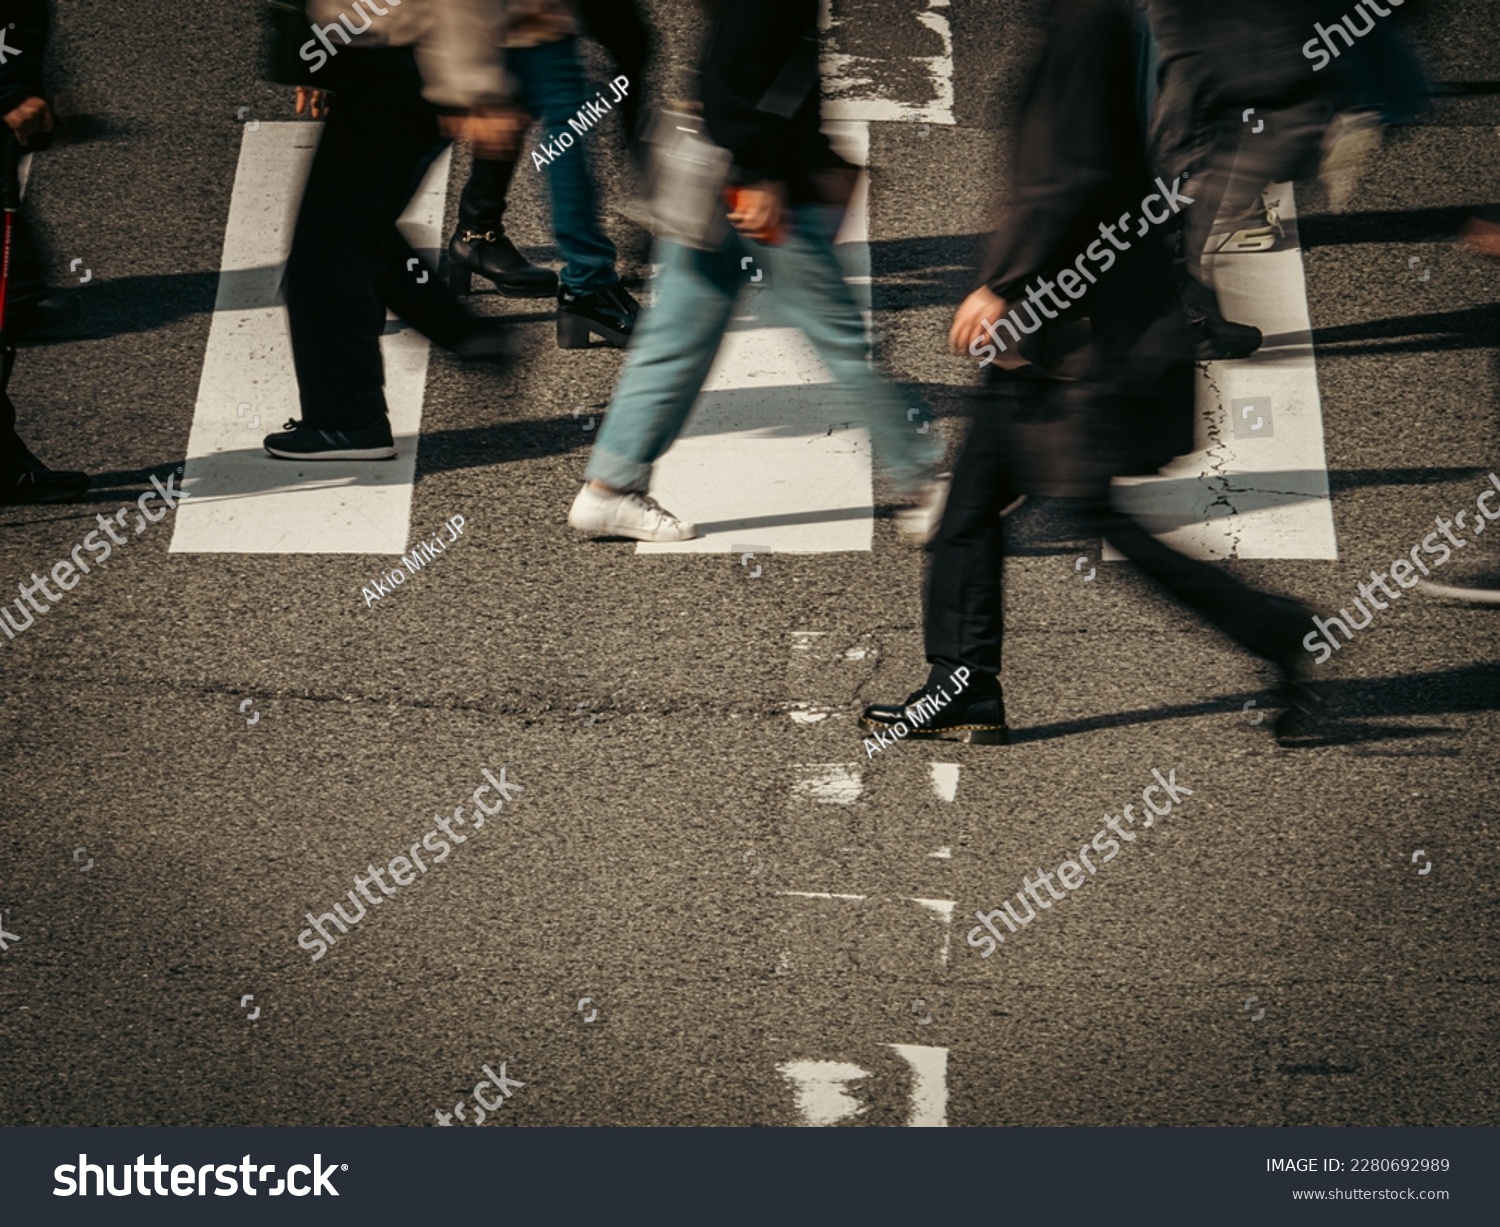 People crowd walking on a pedestrian crossing, City of Osaka in Japan, Business or work background, Blurred image #2280692989